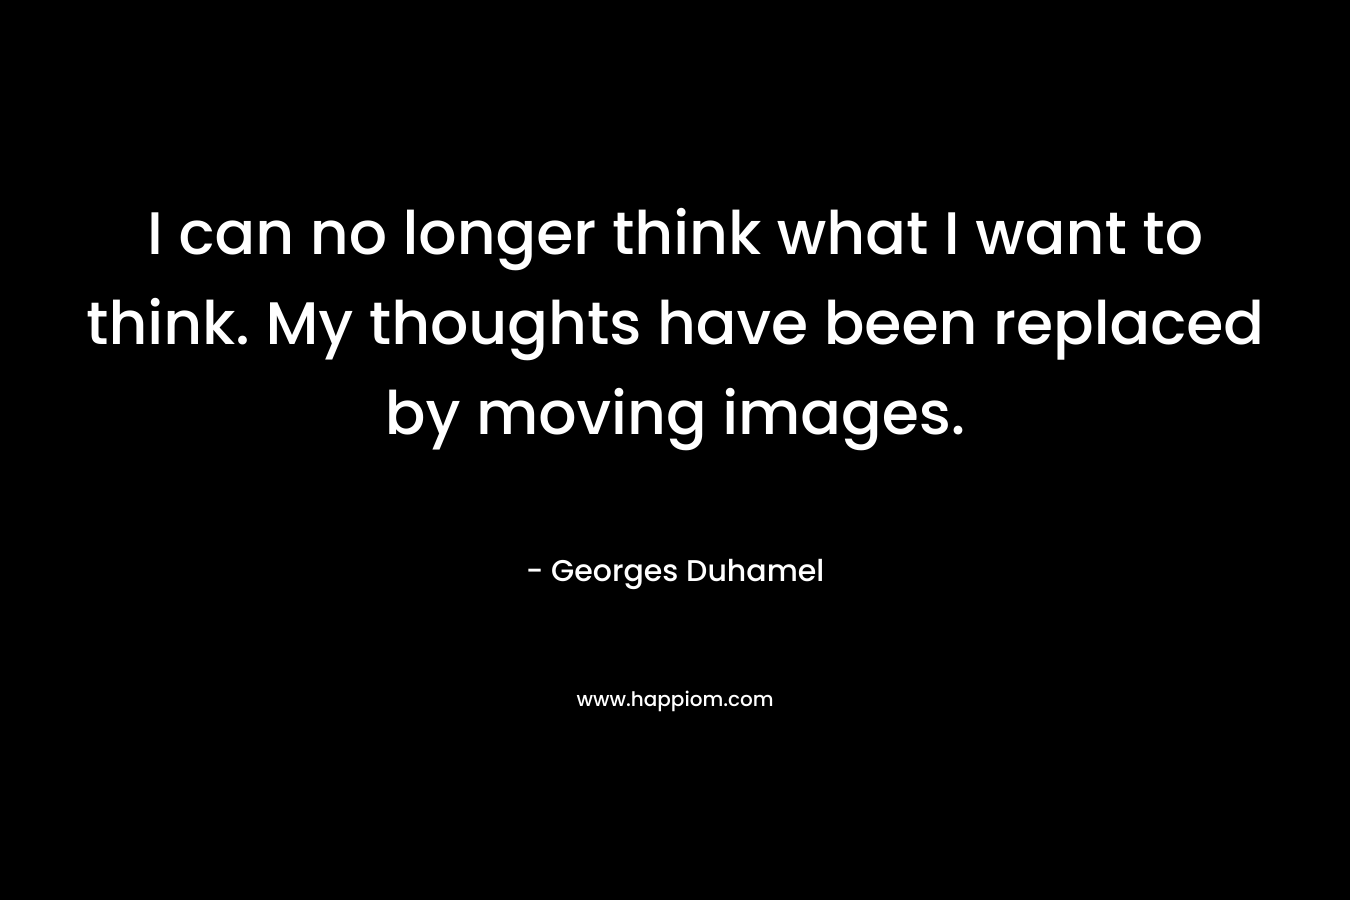 I can no longer think what I want to think. My thoughts have been replaced by moving images.